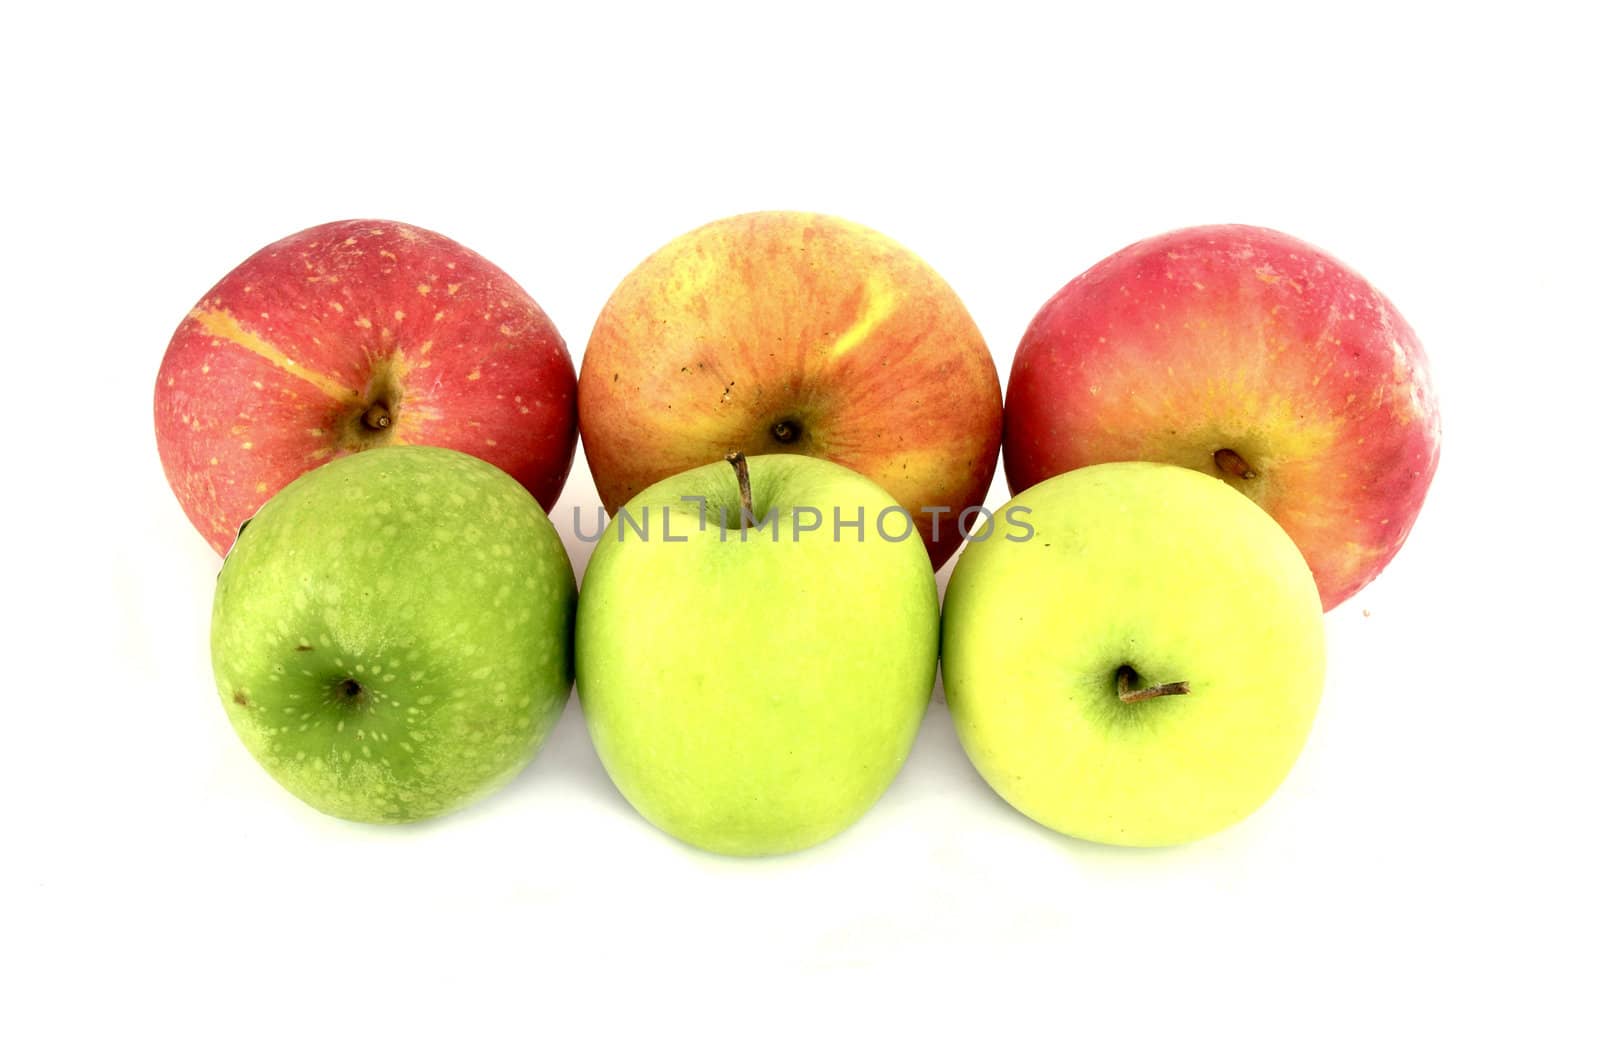 different colors apples on white background by geargodz